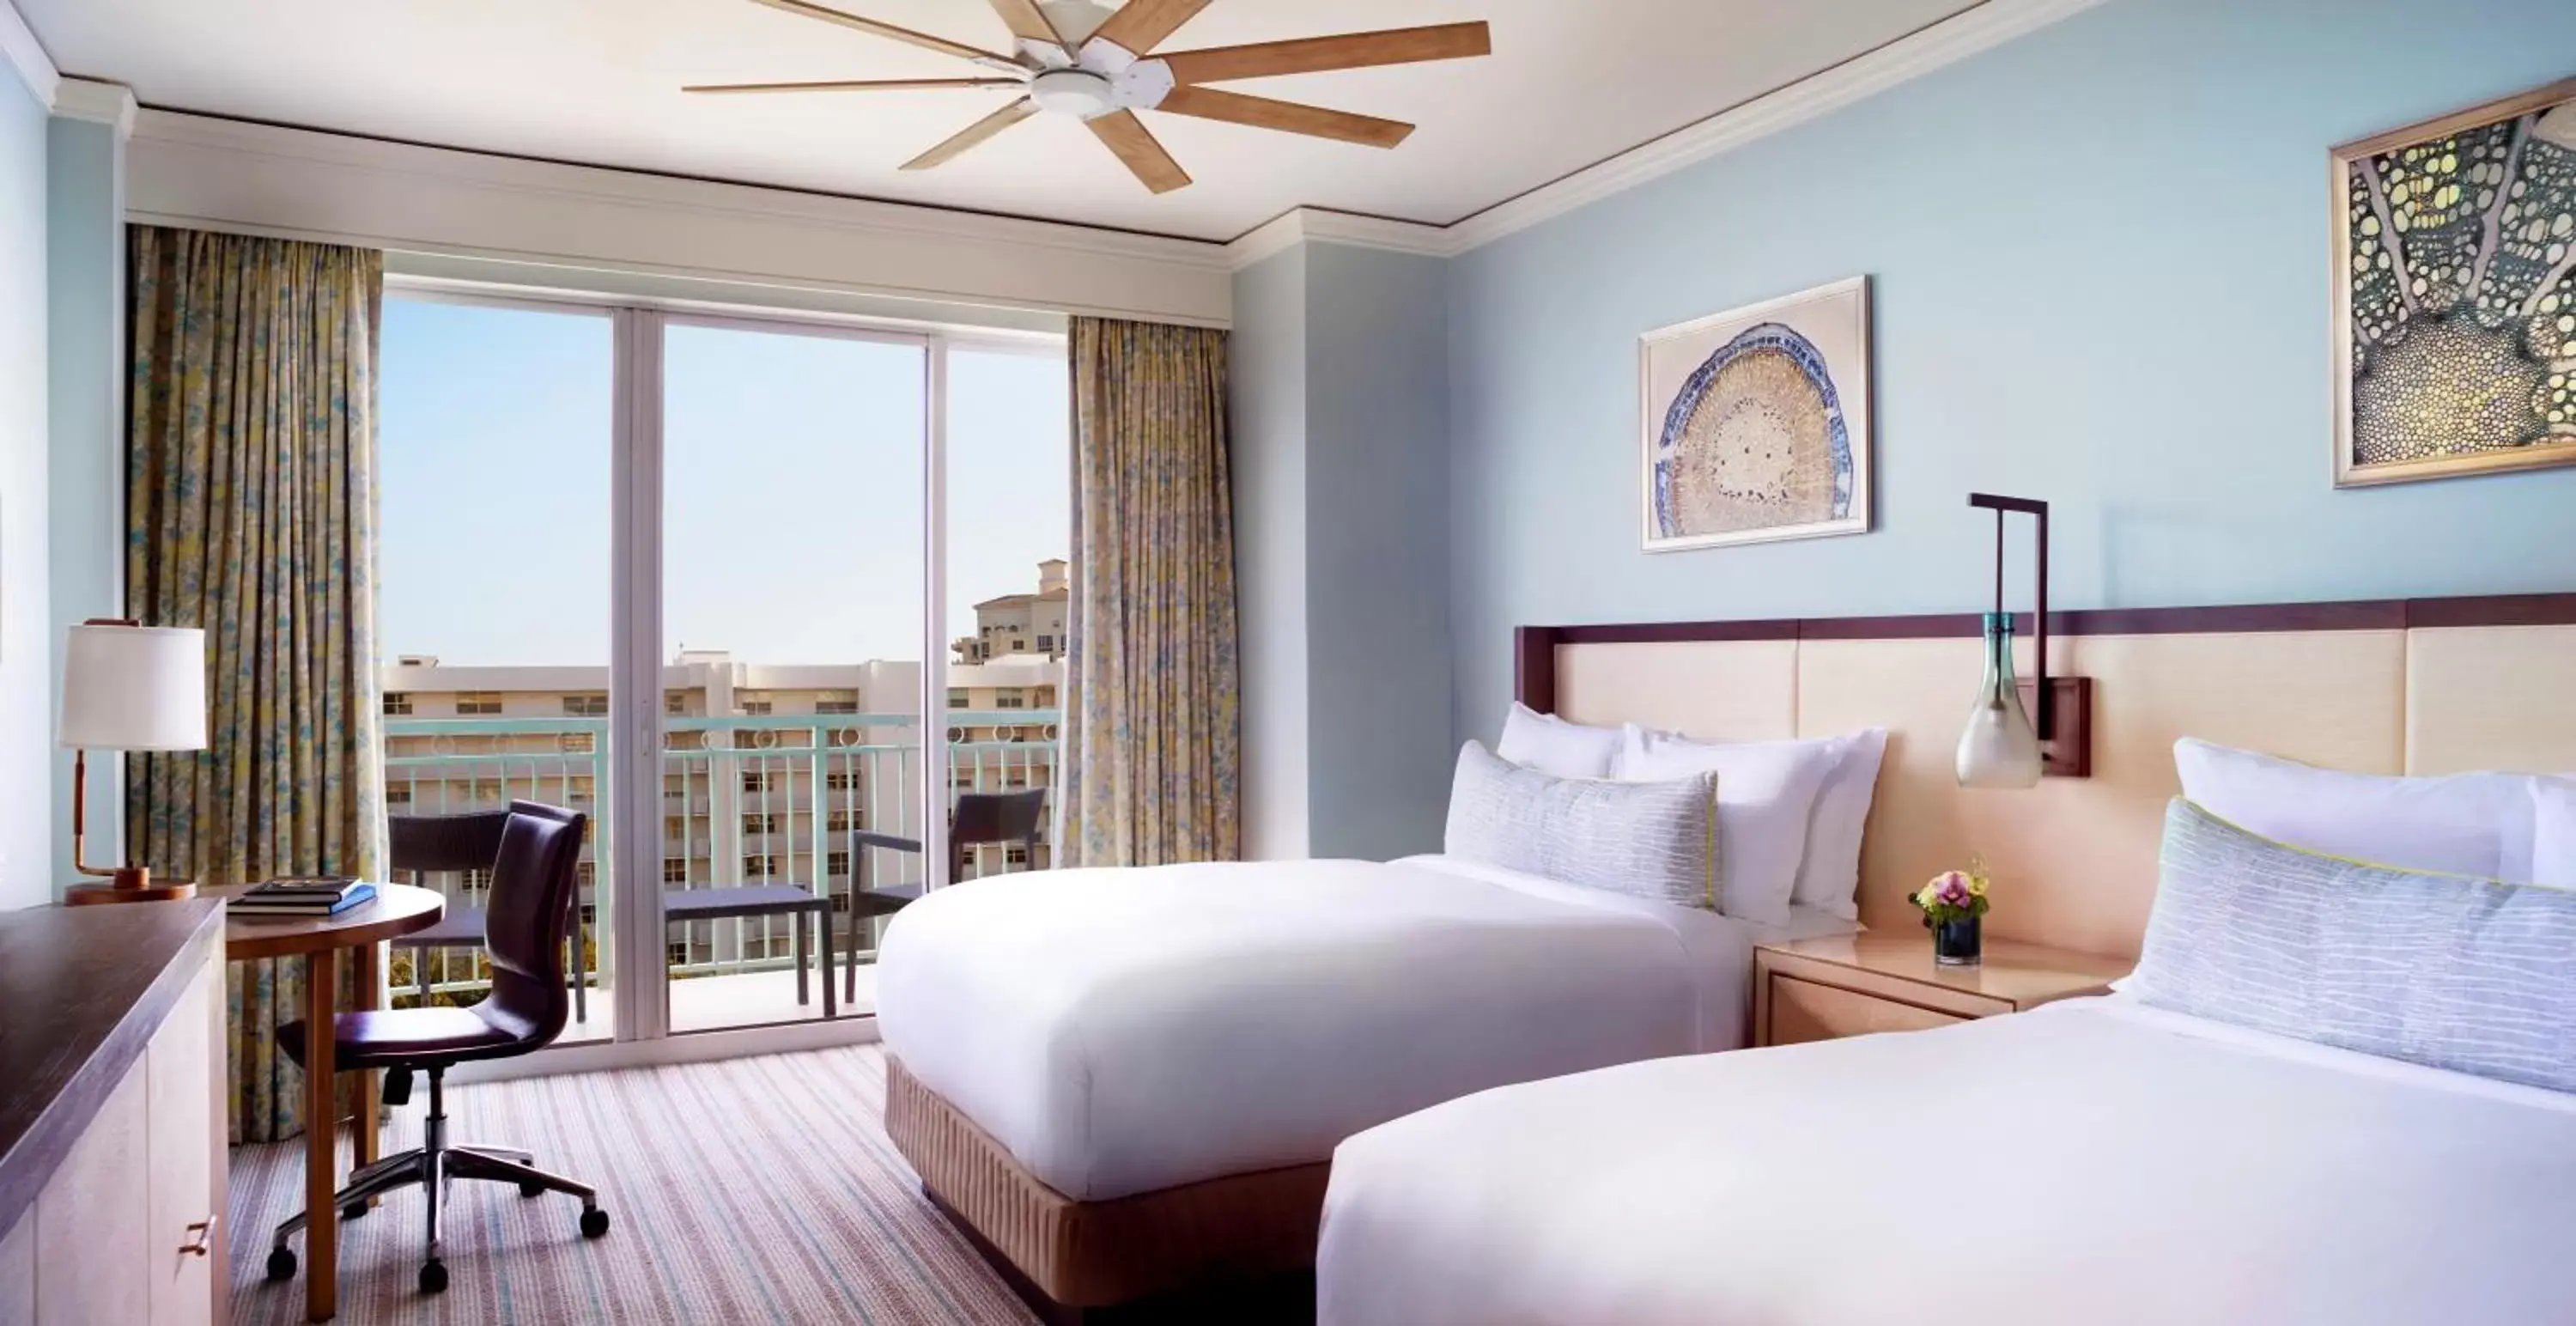 King or Double Room - Low Level  in The Ritz Carlton Key Biscayne, Miami